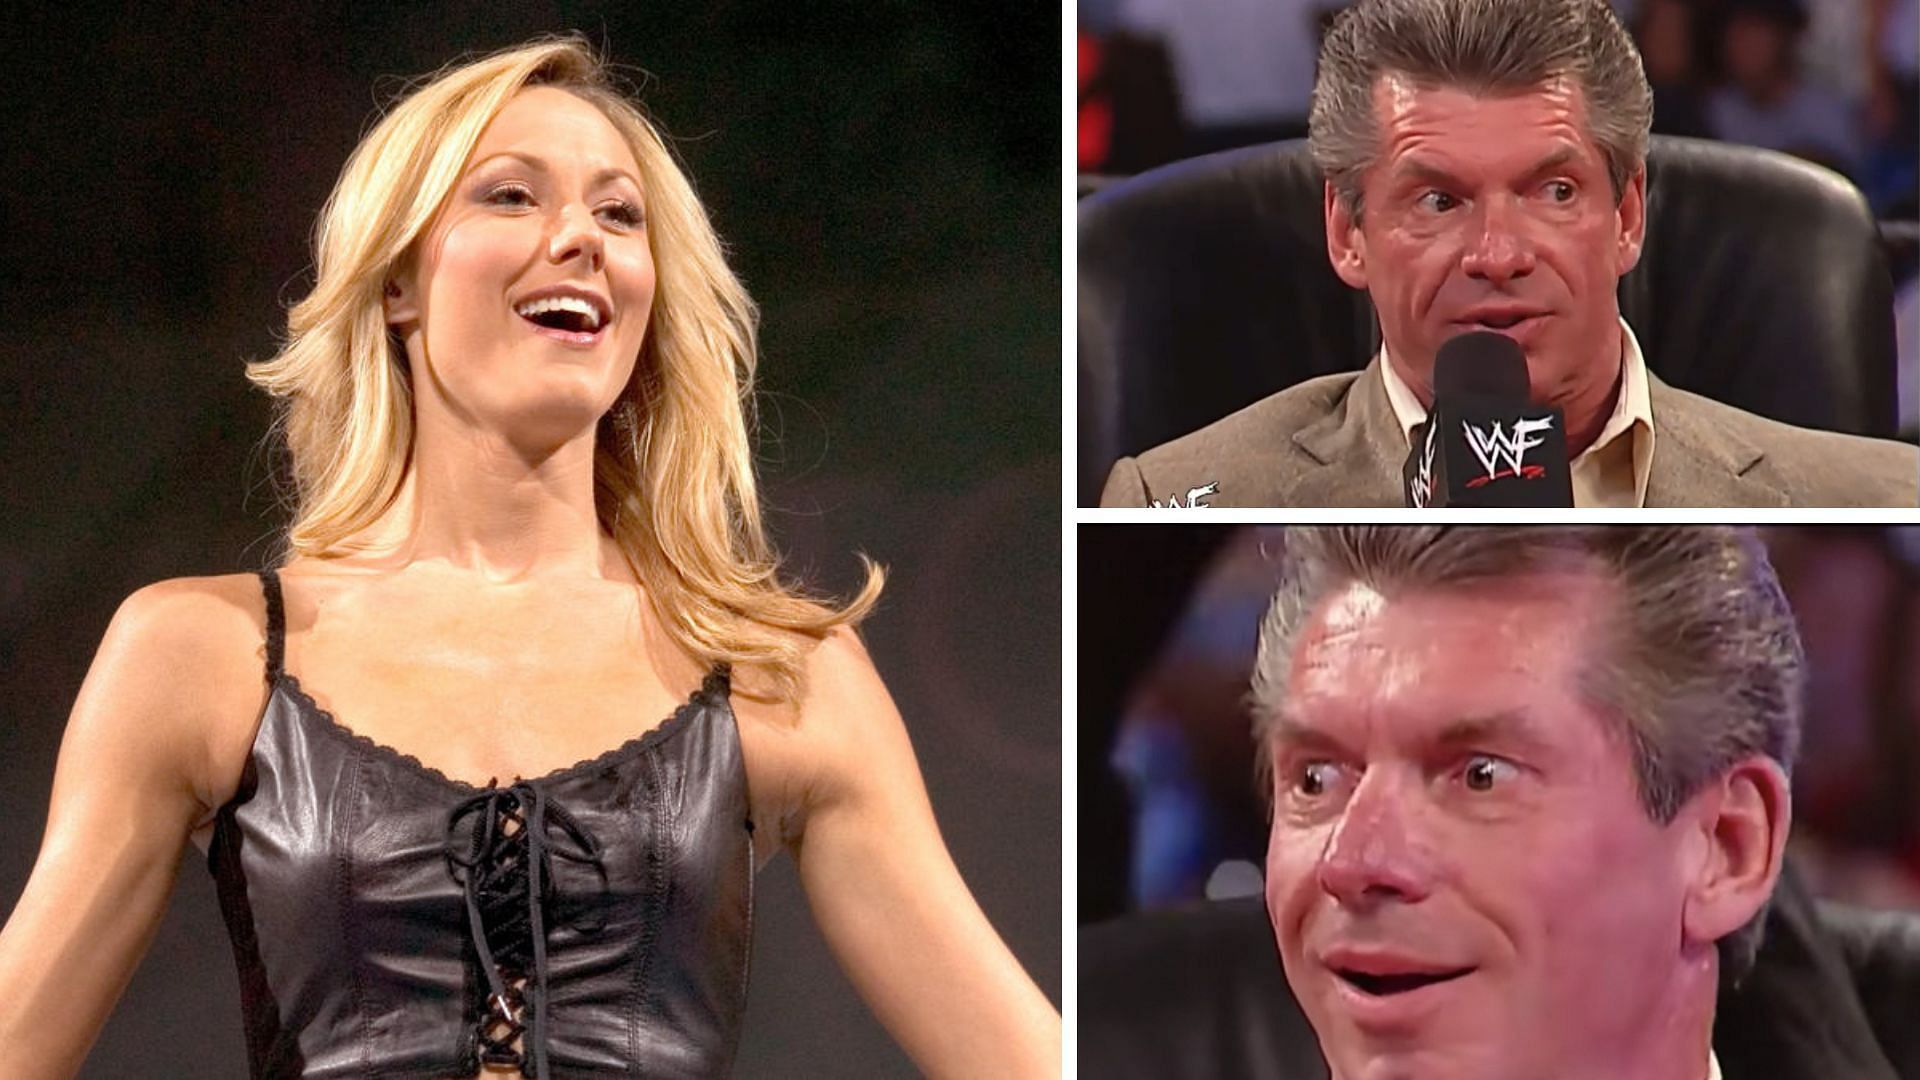 Vince McMahon meme came from a segment featuring Stacy Keibler